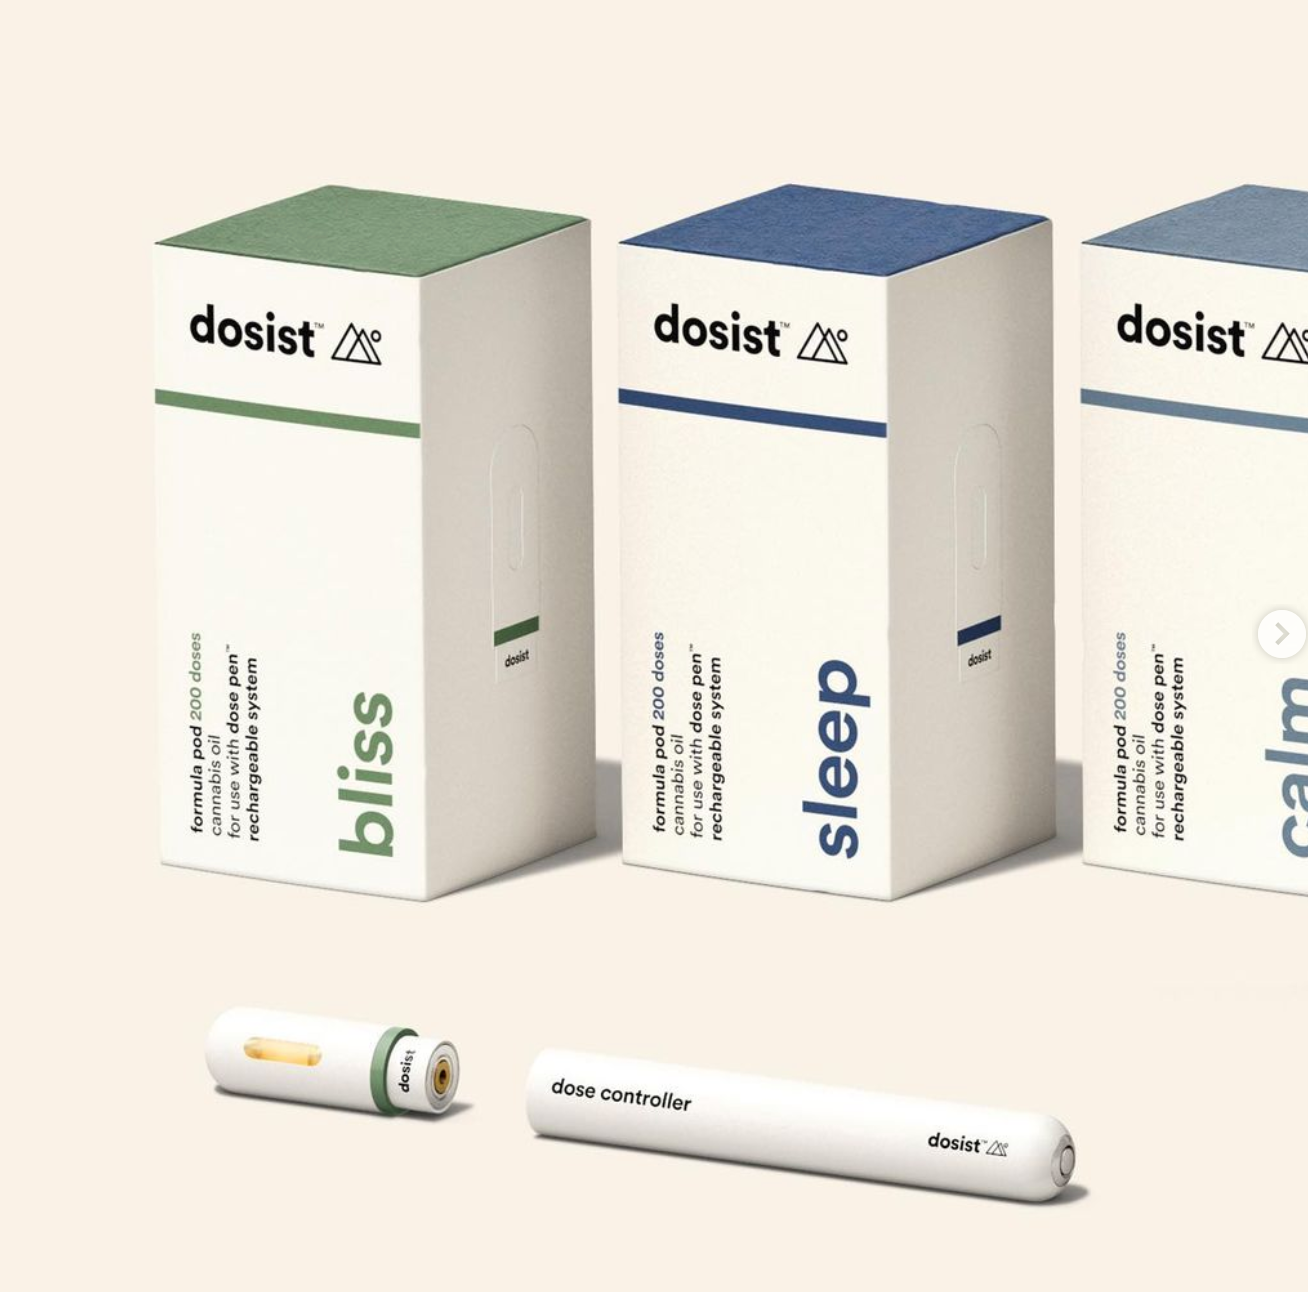 The Dosist Vape Pens have a variety of effects